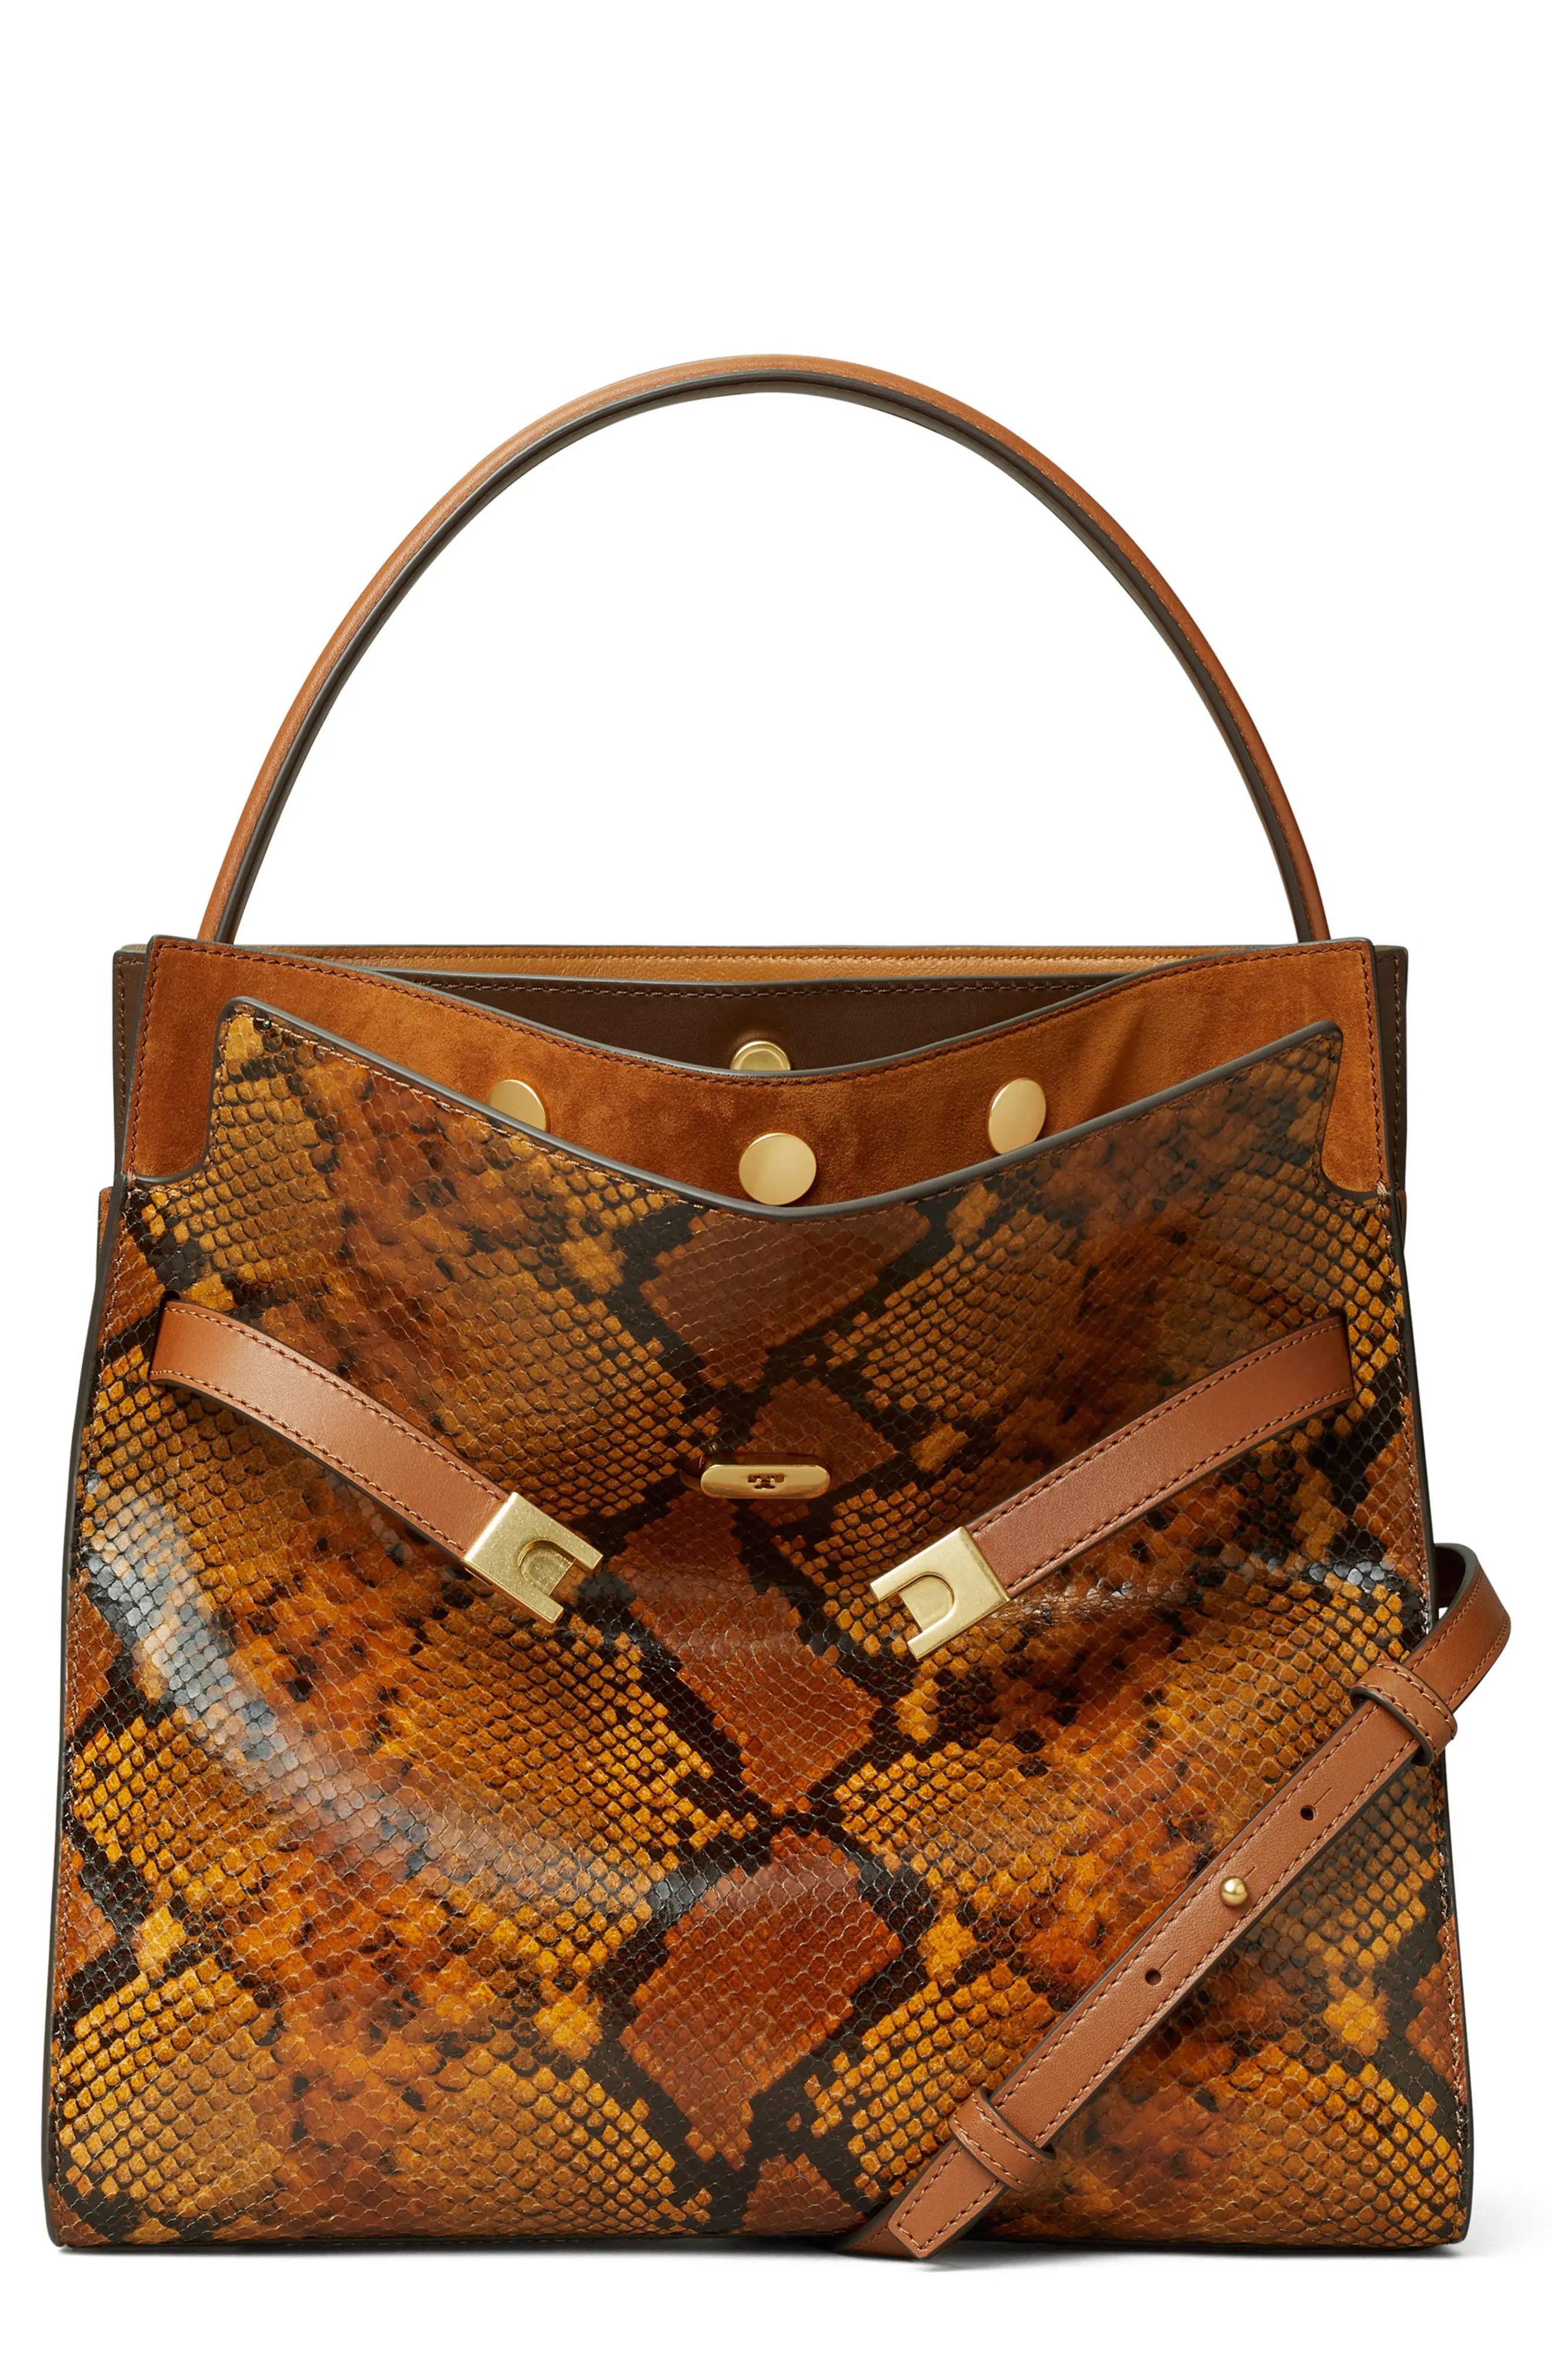 Tory Burch Lee Radziwill Snakeskin Print Small Leather Bag - Brown | Nordstrom